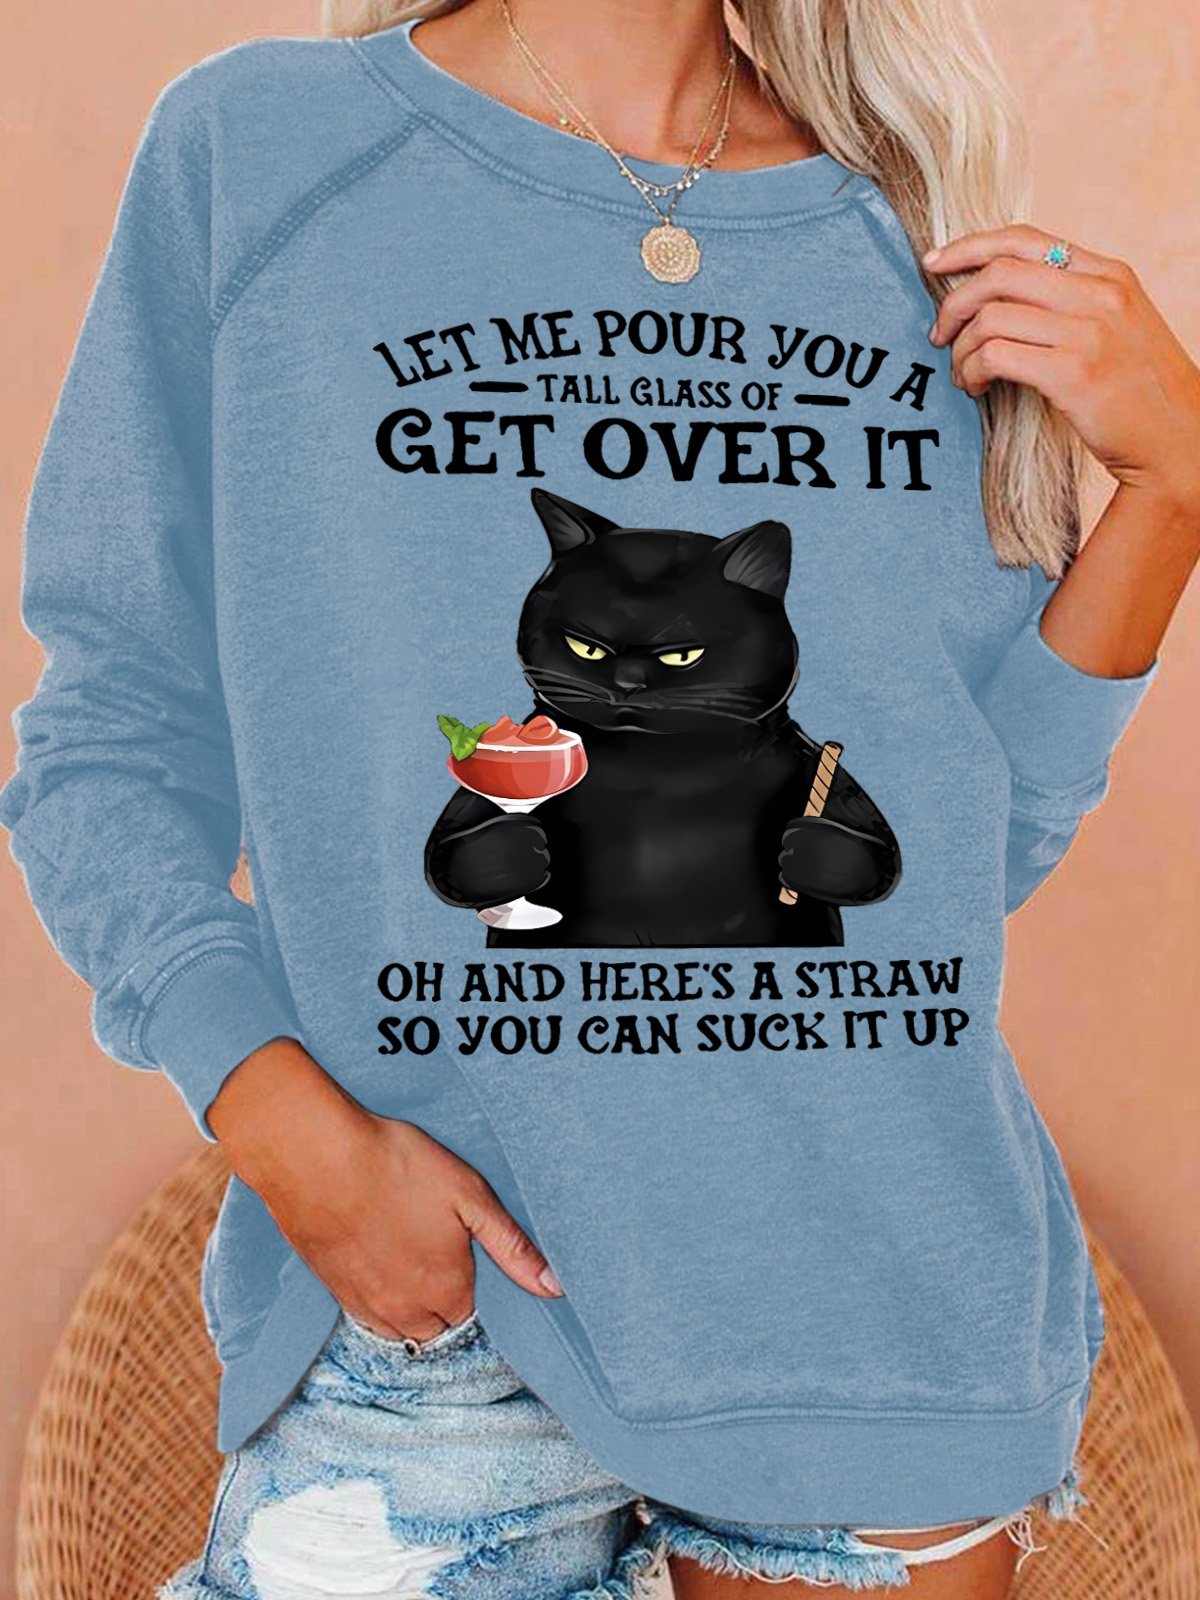 Let Me Pour You A Tall Glass Of Get Over It Oh And Here’s A Straw So You Can Suck It Up Women's Sweatshirt